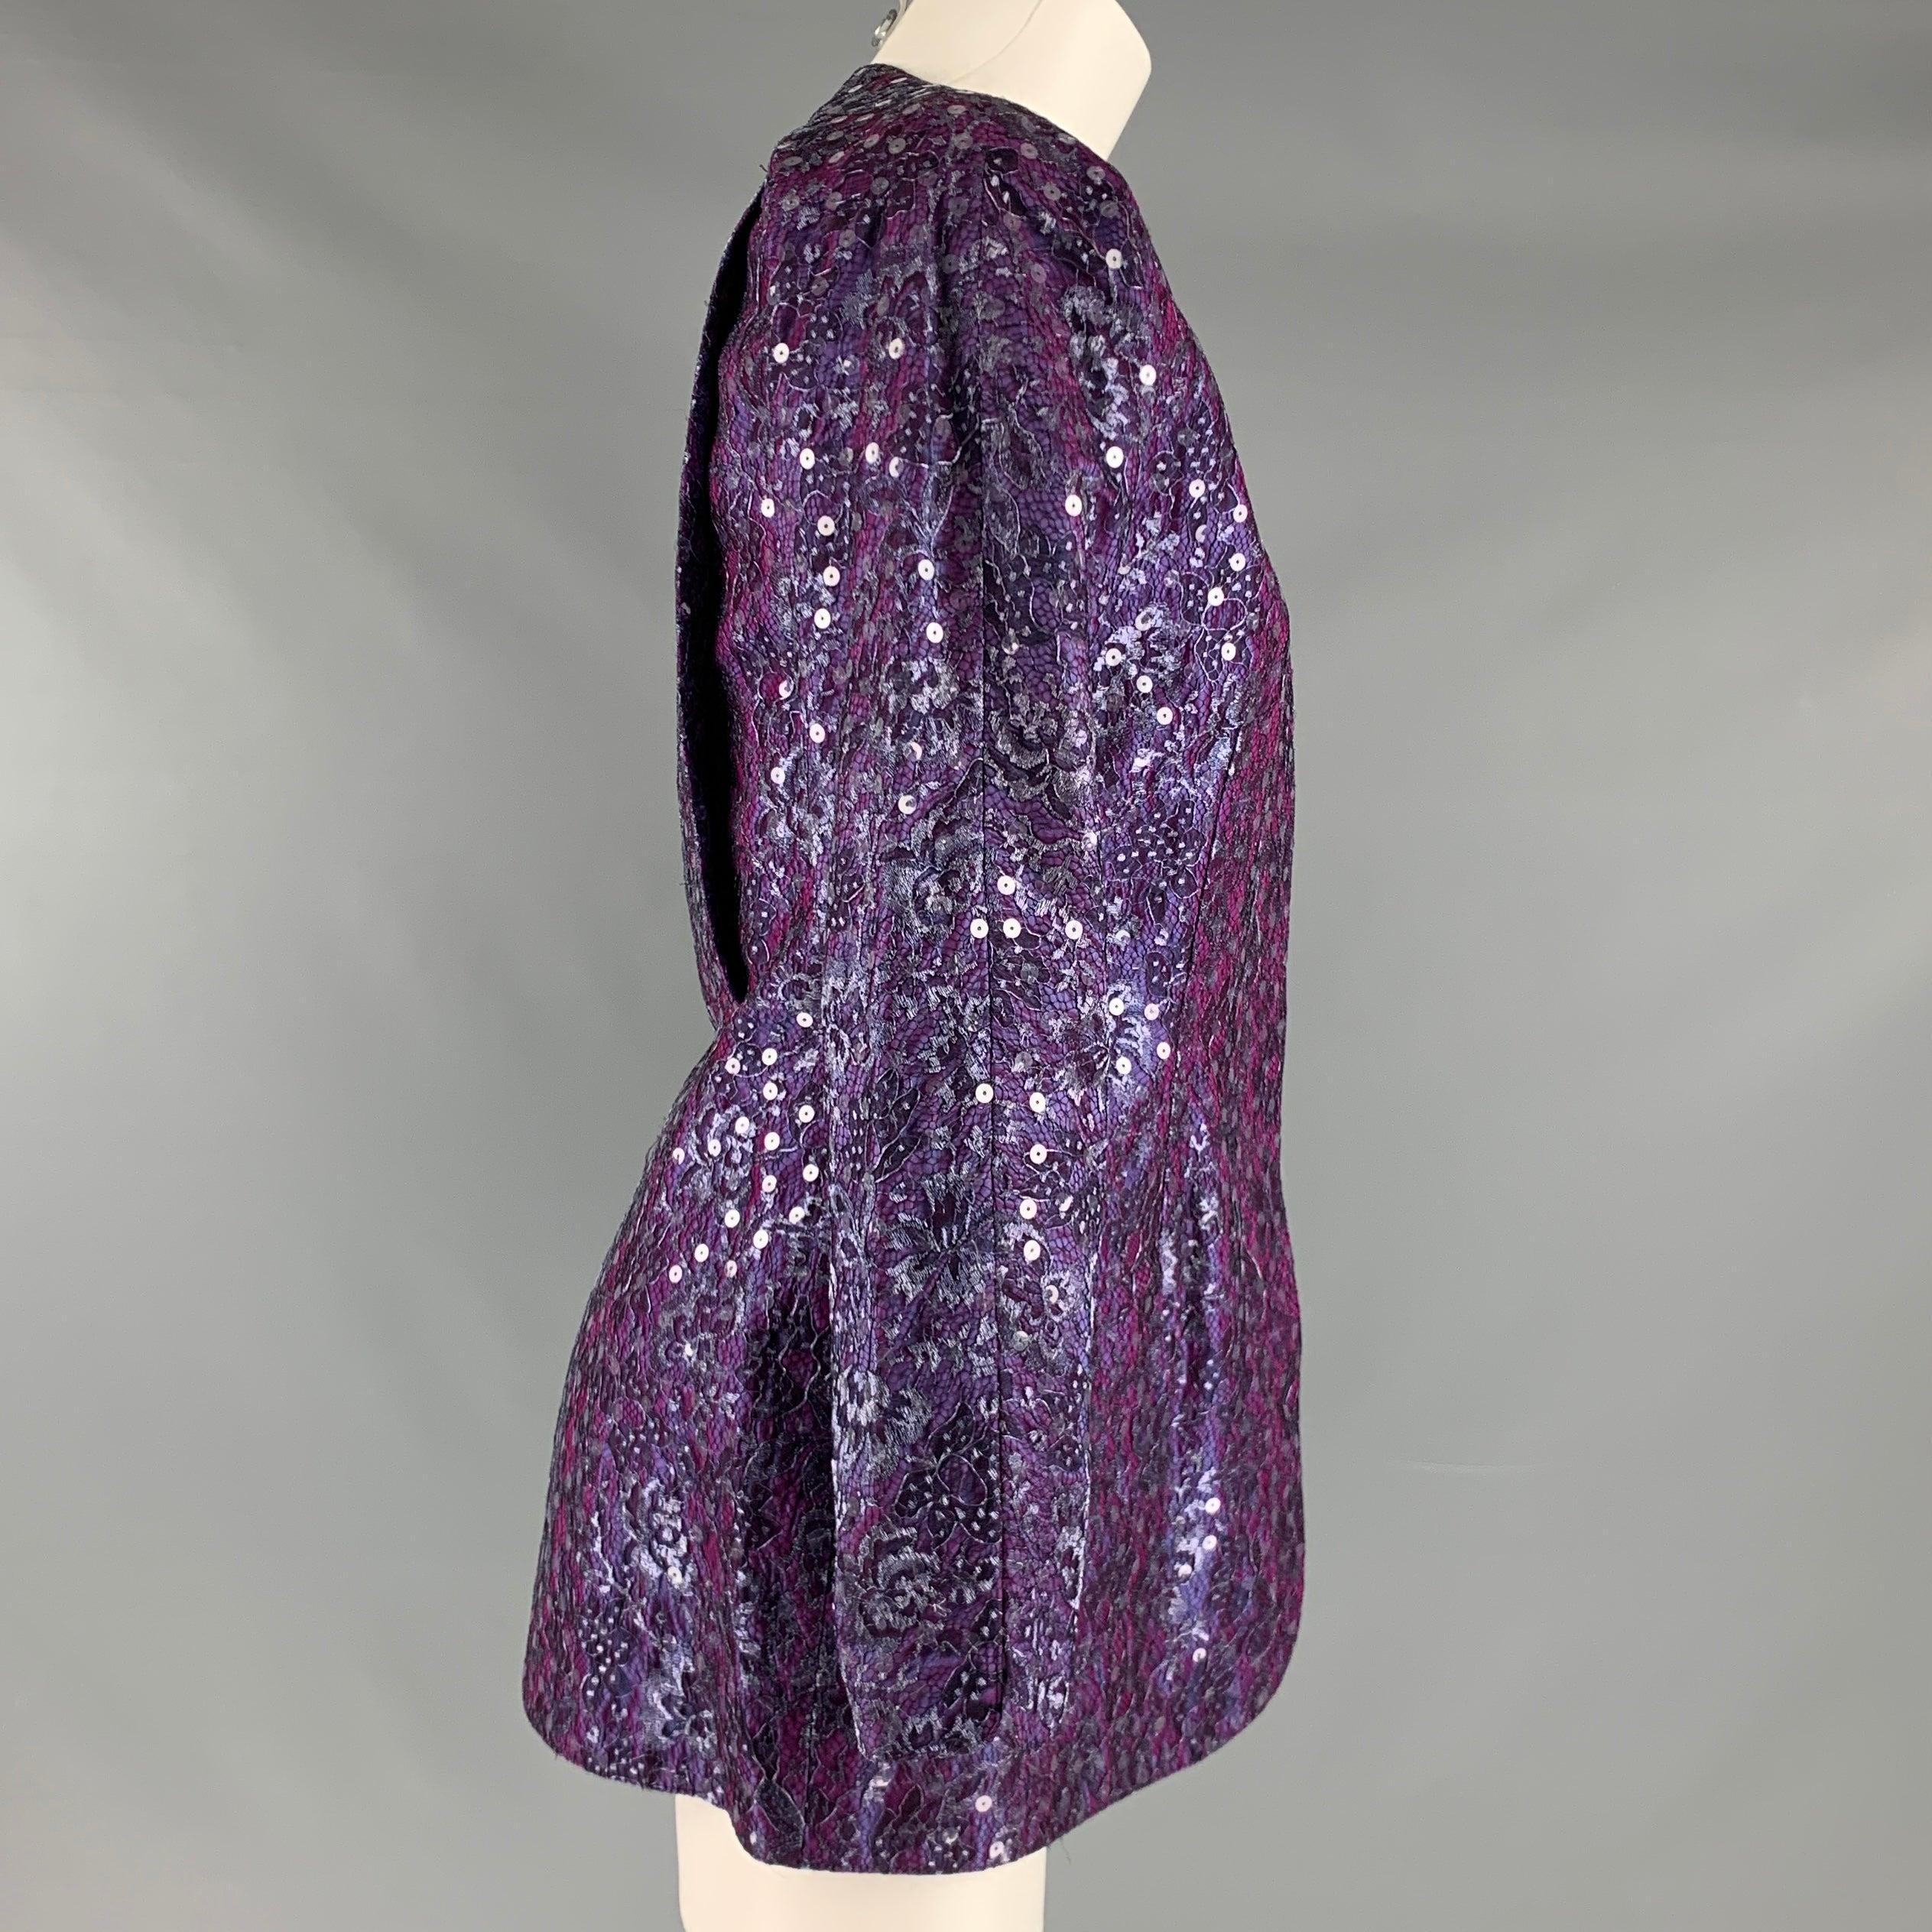 GEOFFREY BEENE blazer comes in a purple and silver lace material featuring flap pockets, collarless style, hidden packet and button up closure.Excellent Pre-Owned Condition. 

Marked:   M 

Measurements: 
 
Shoulder: 16 inches Bust: 37 inches